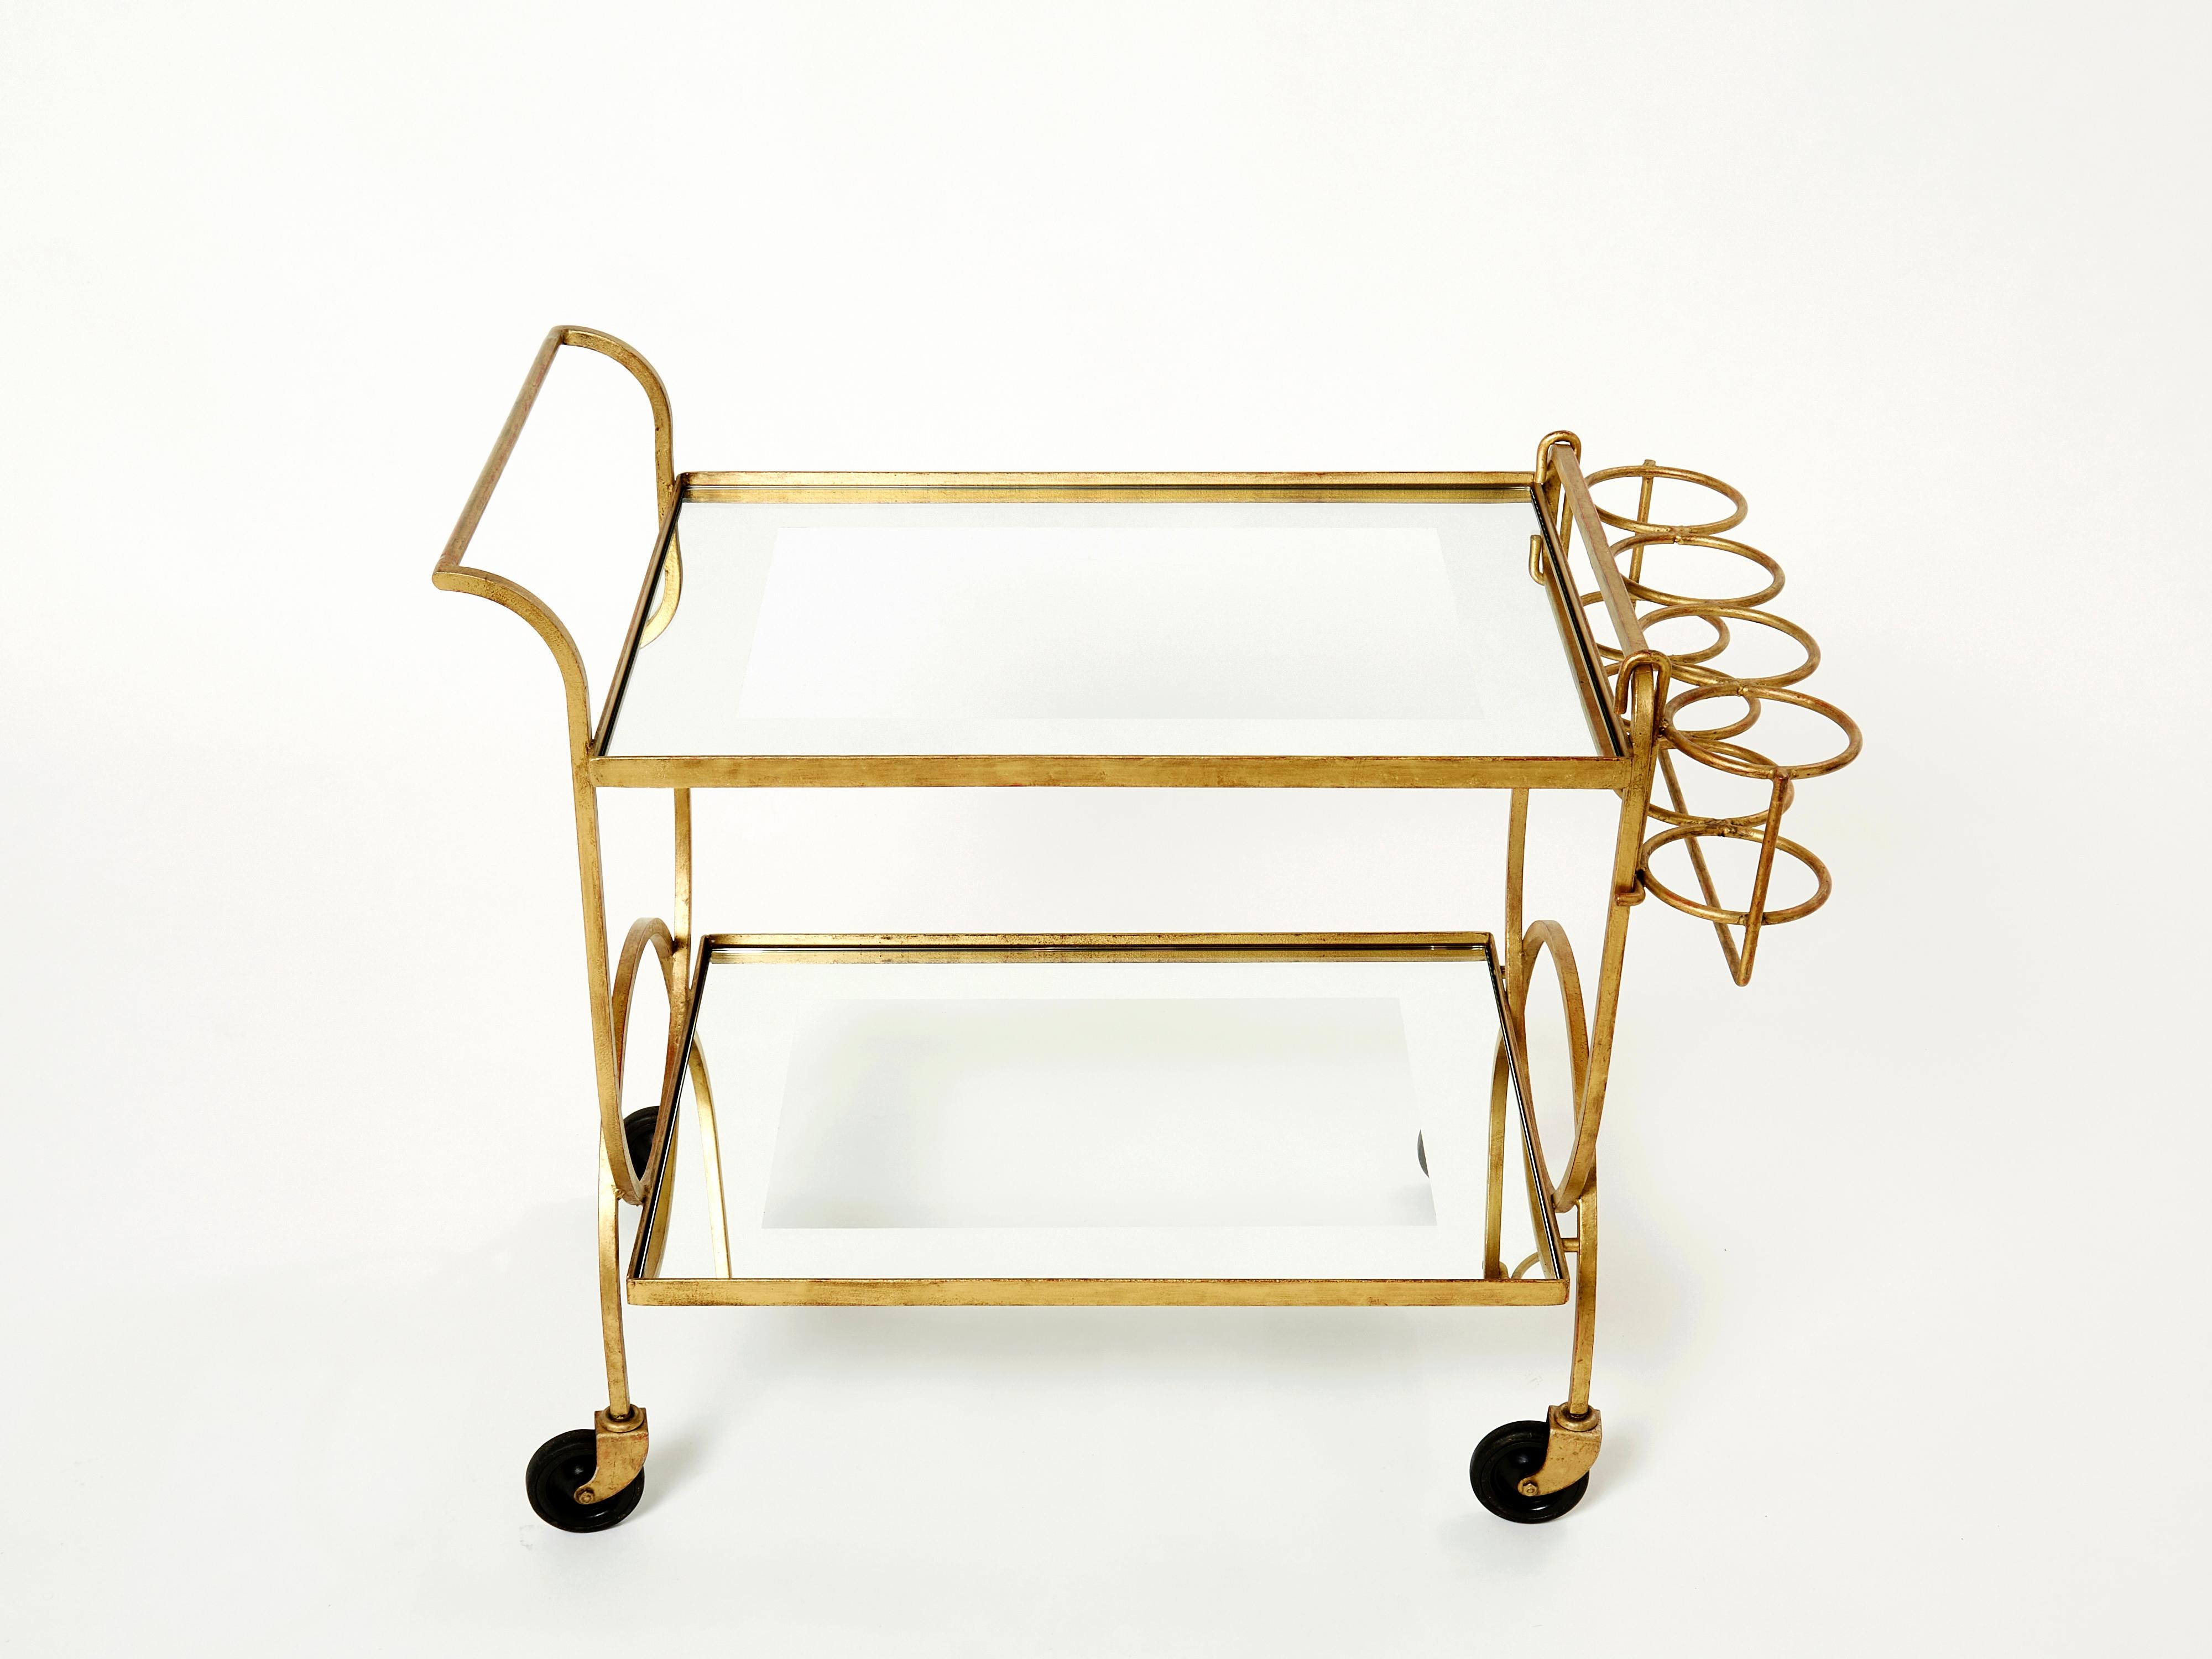 Rare serving trolley by Jean Royère in gilded iron with mirrored glass made circa 1950. Glittering in an antiqued gold gilt finish, this iron craft bar cart adds a glam twist which makes a gracious compliment to both traditional and modern spaces.